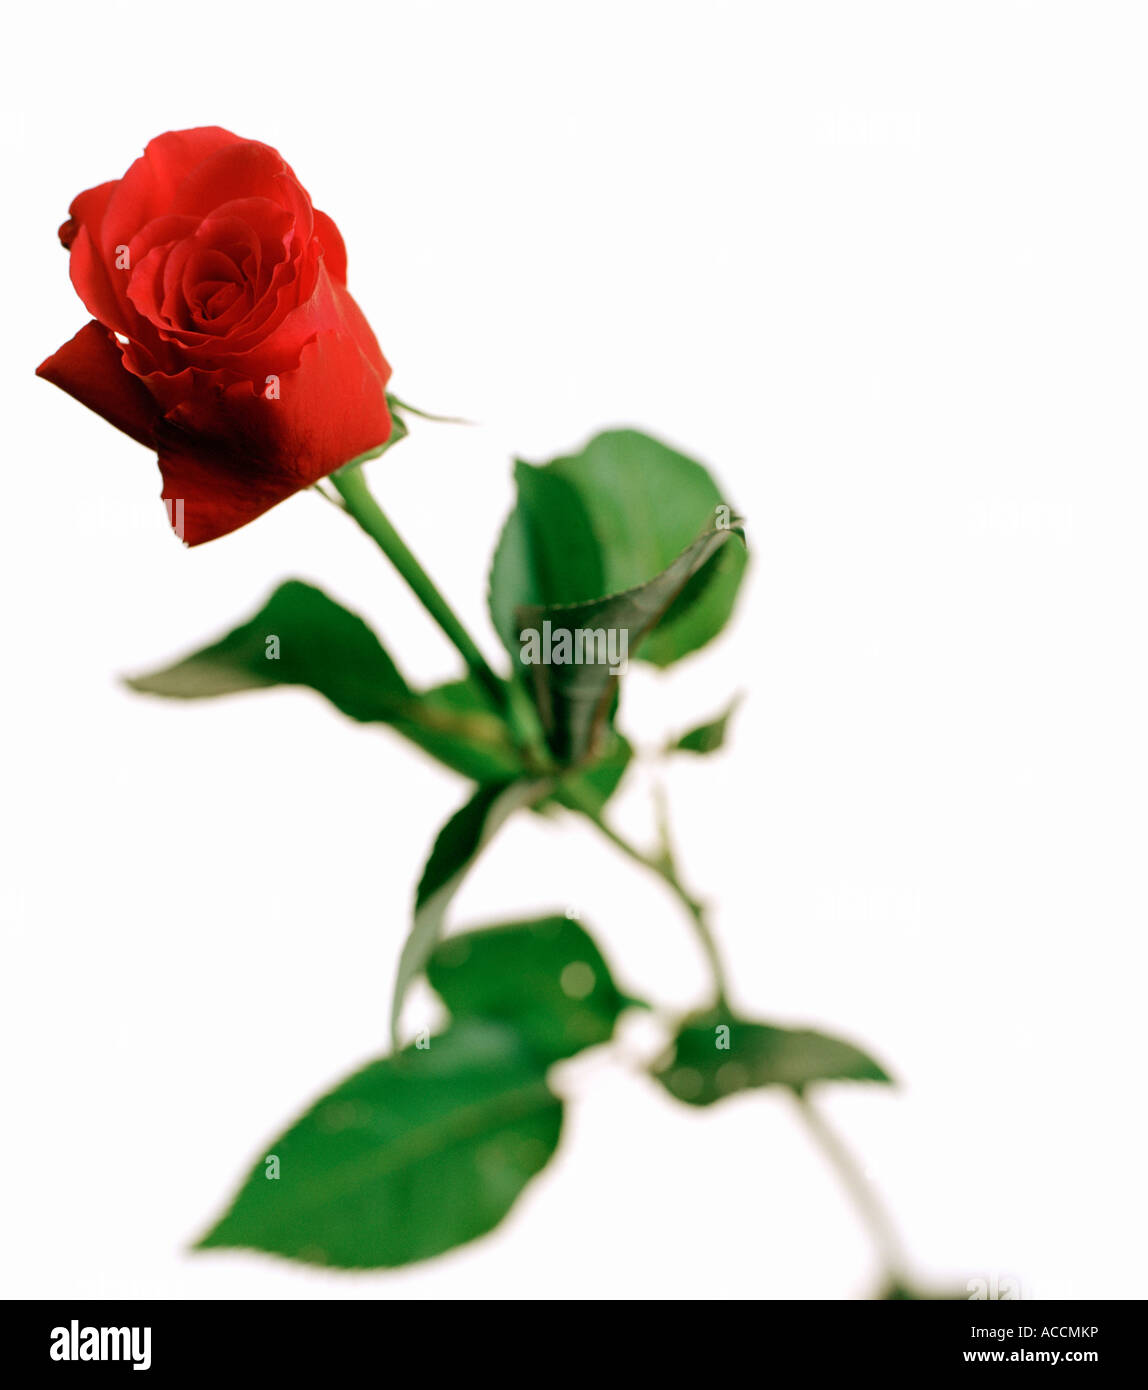 Red rose on a white background. Stock Photo